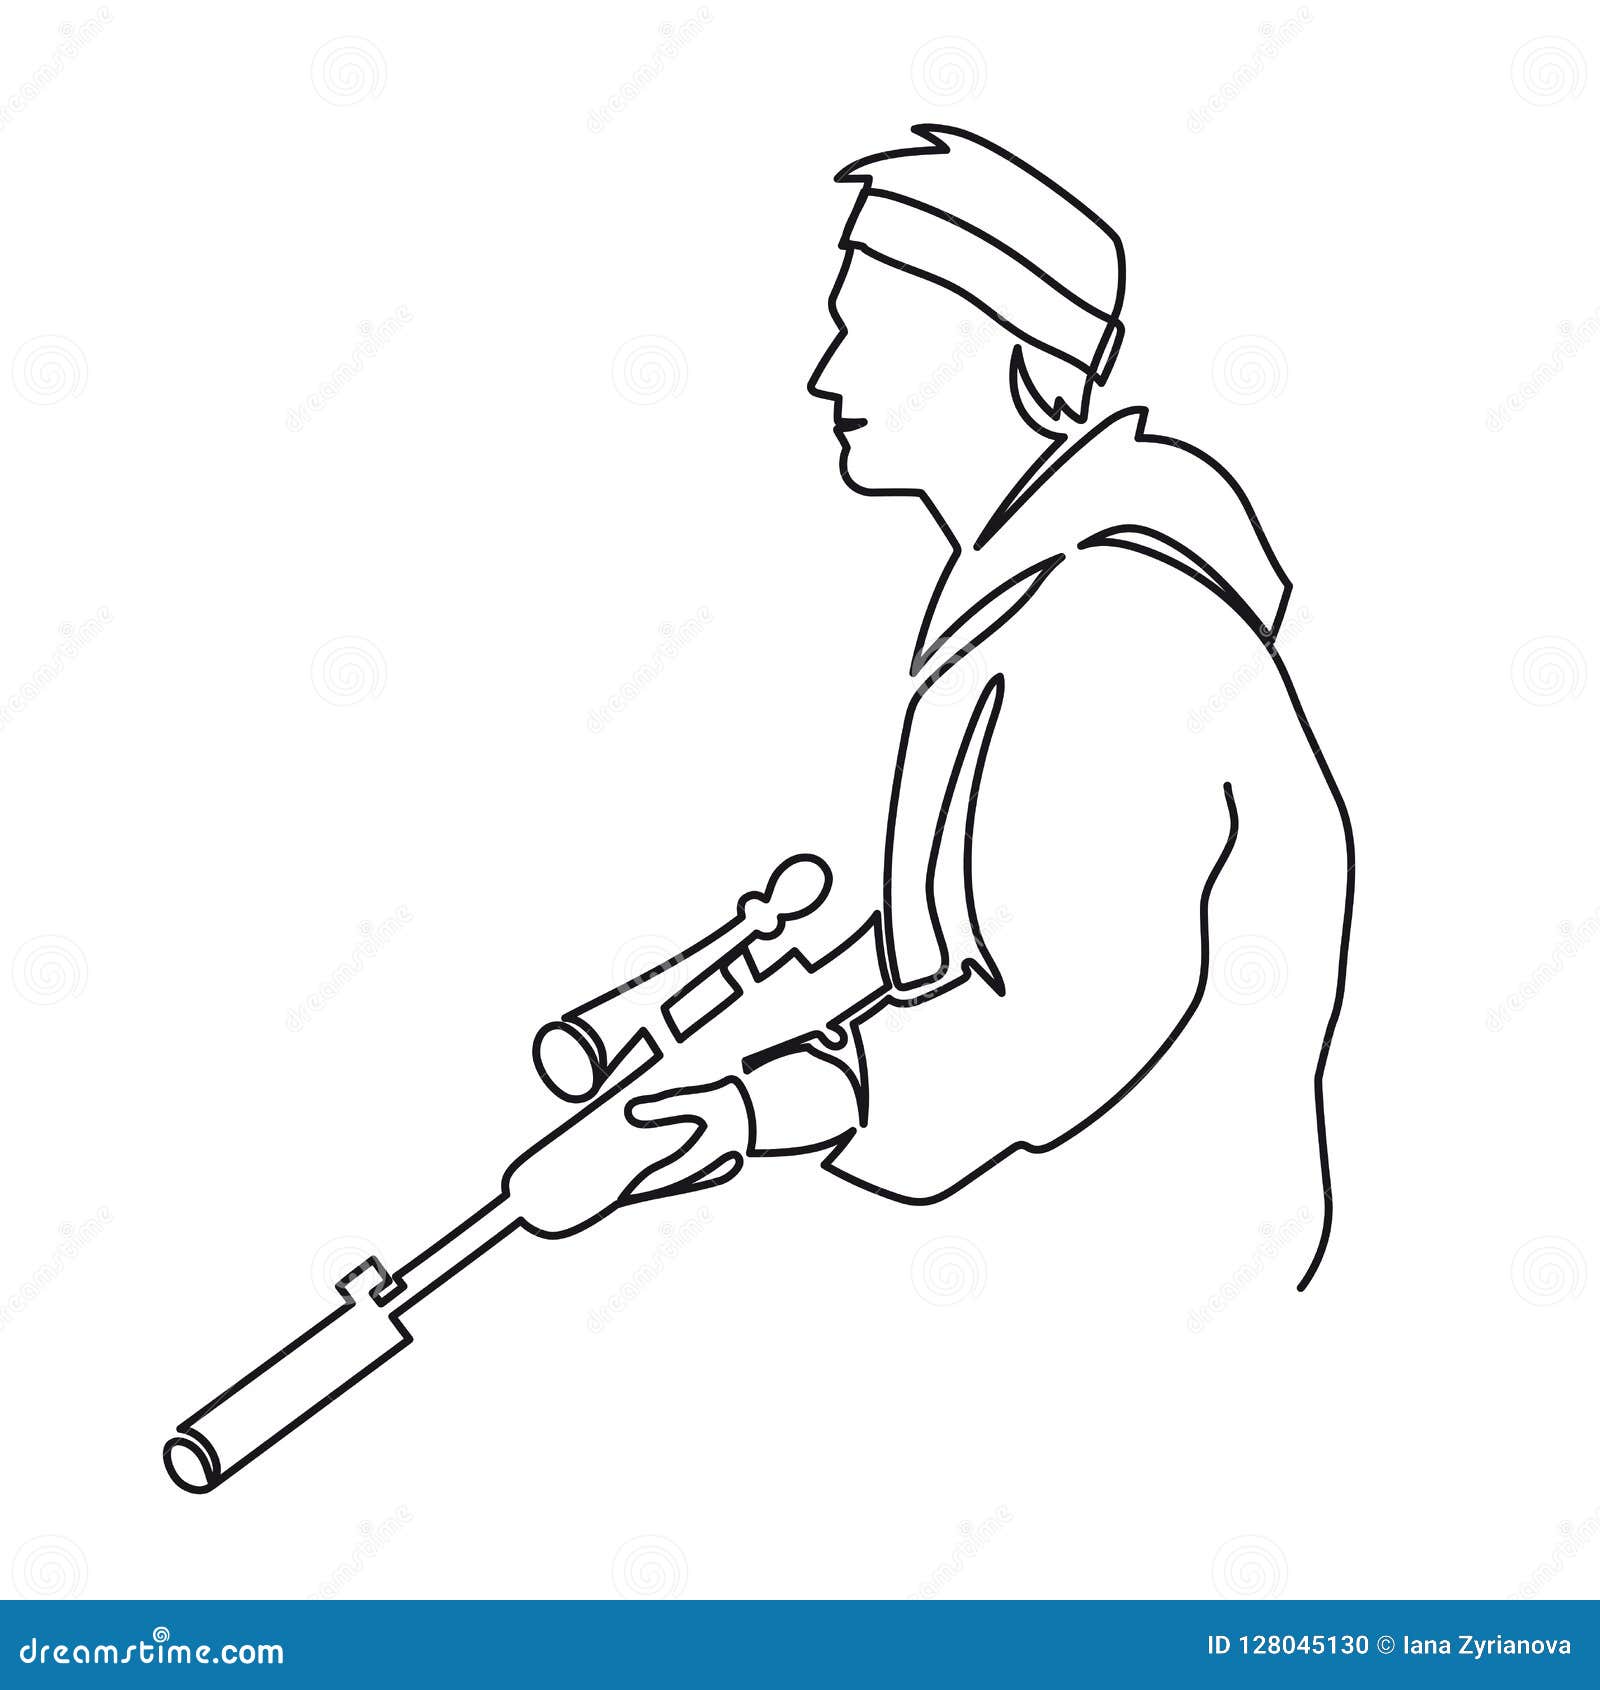 Army Sketch Vector Images (over 5,600)